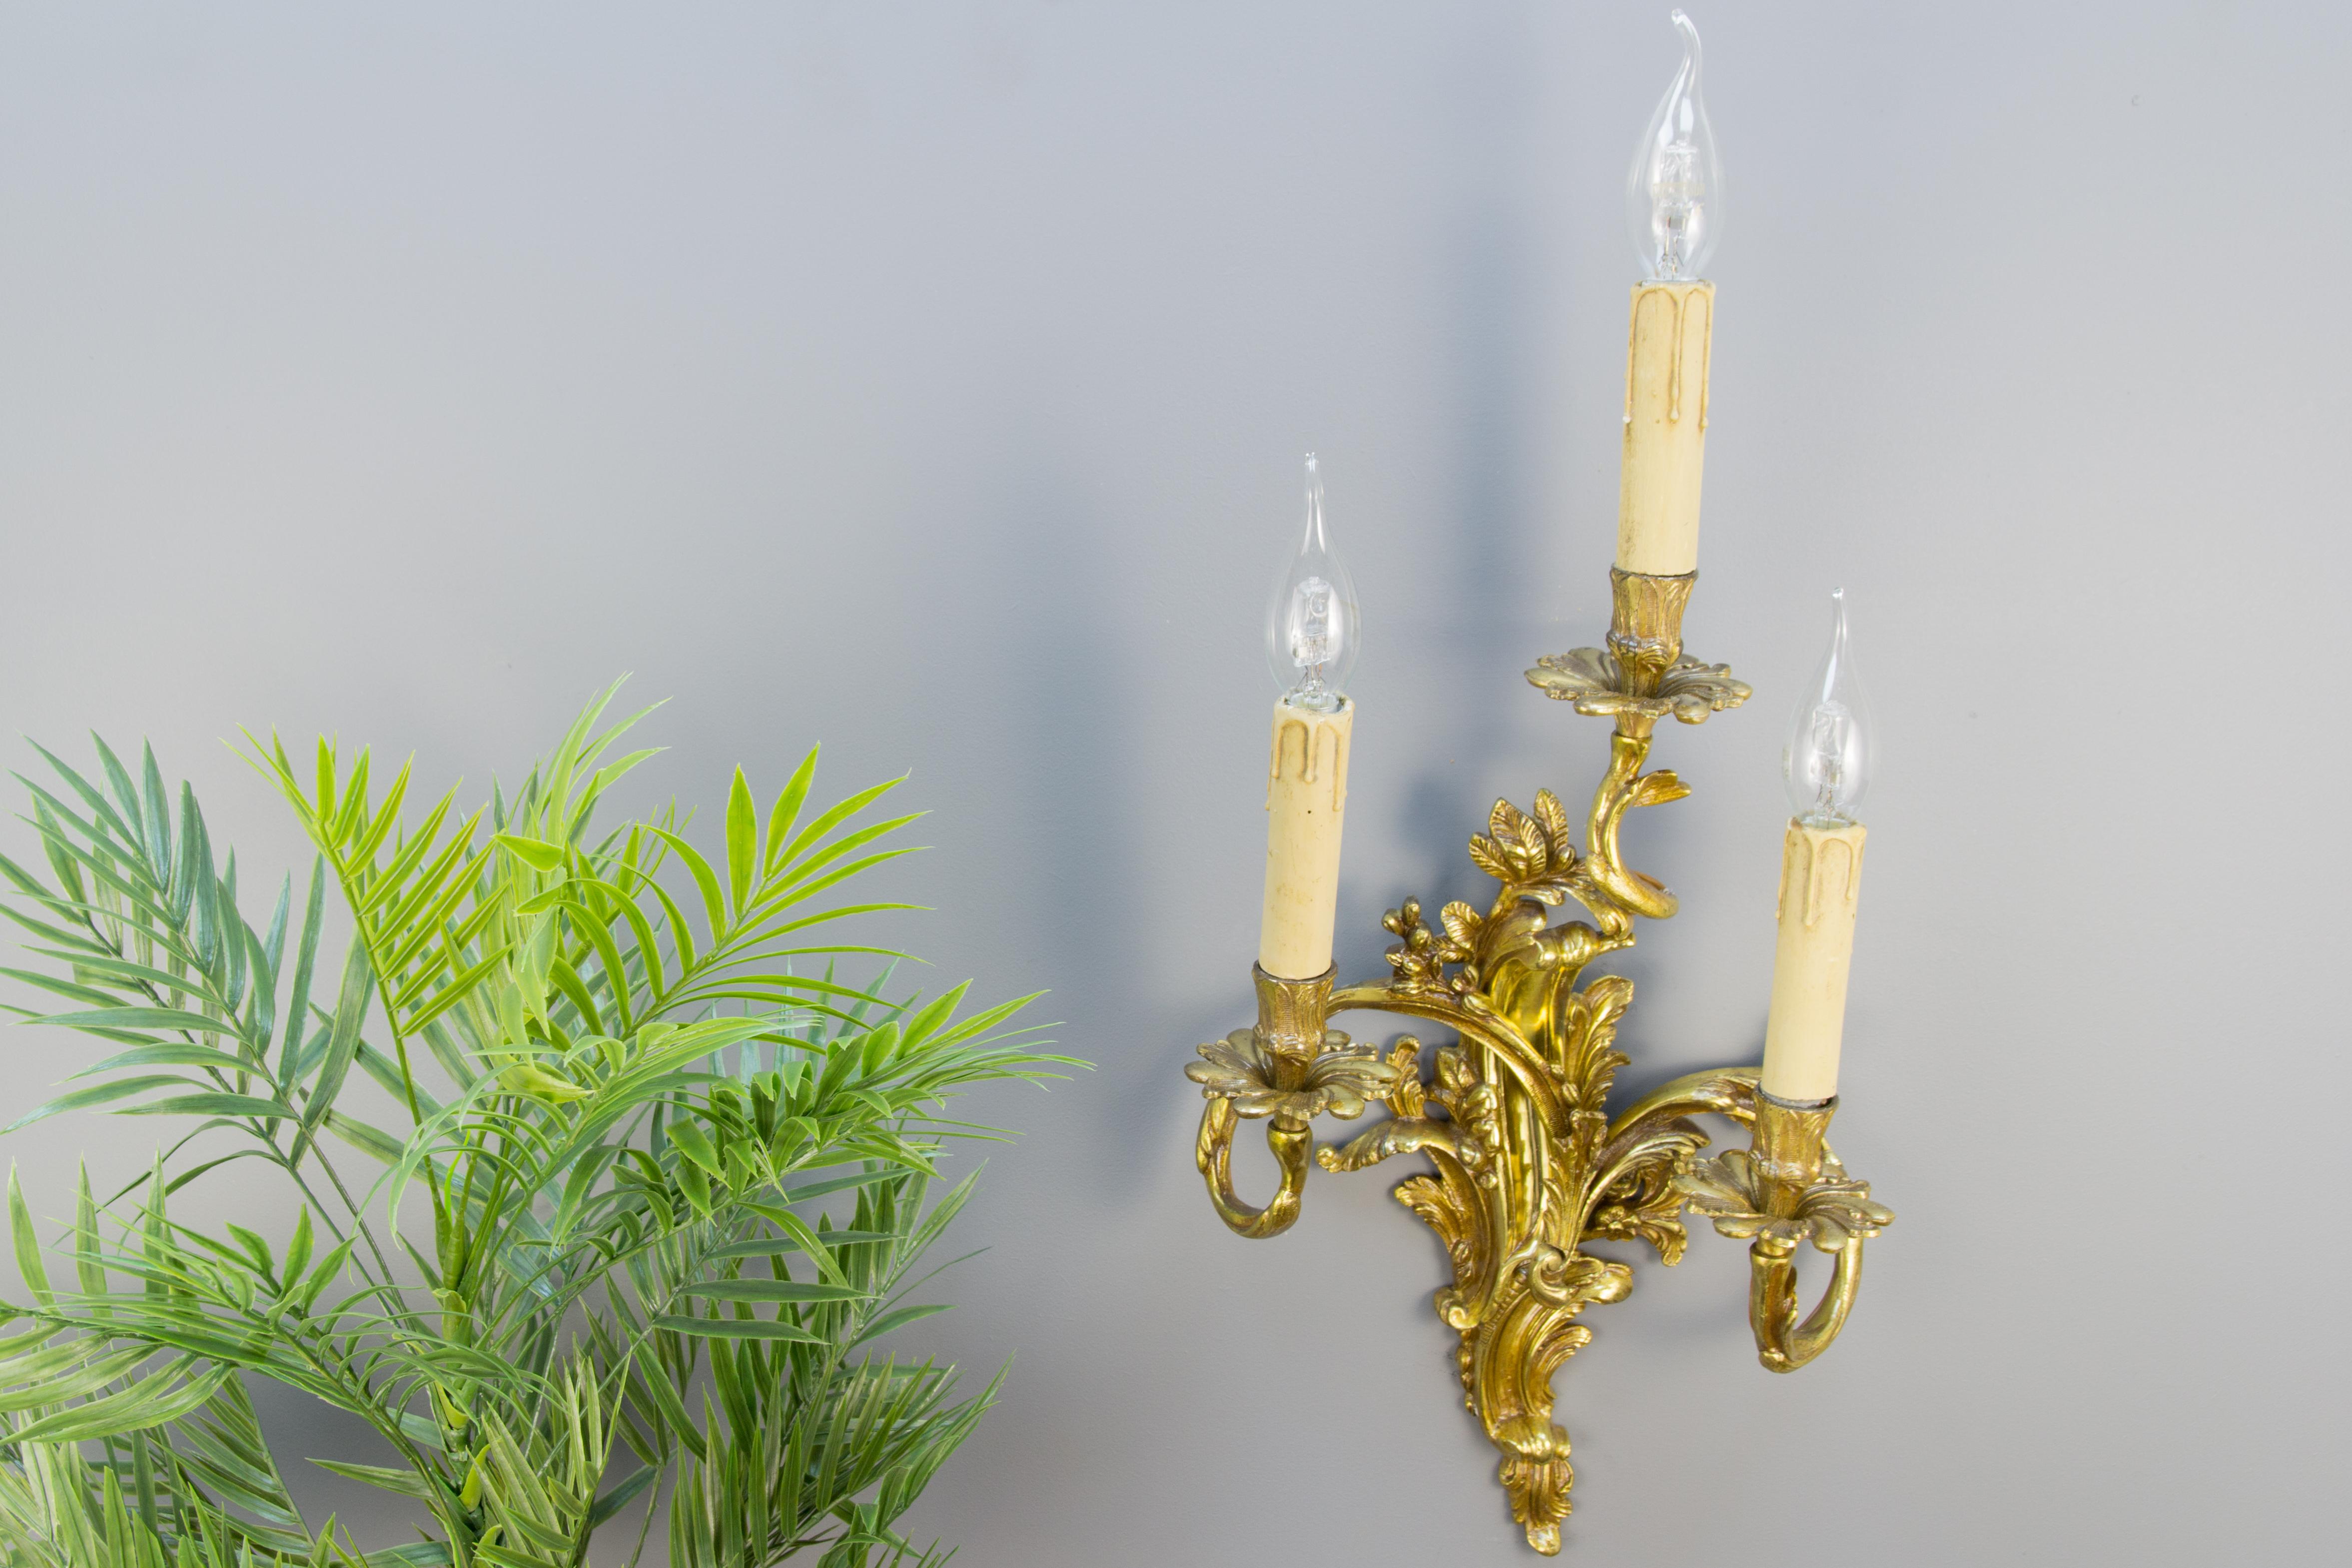 Large Louis XV French Rococo style three–arm sconce. Curvy asymmetrical acanthus leaf-like gilt bronze scrolls in Classic French Rococo style. Each arm has a socket for the E14 light bulb. Wooden candle covers. France, circa the 1920s.
Measures